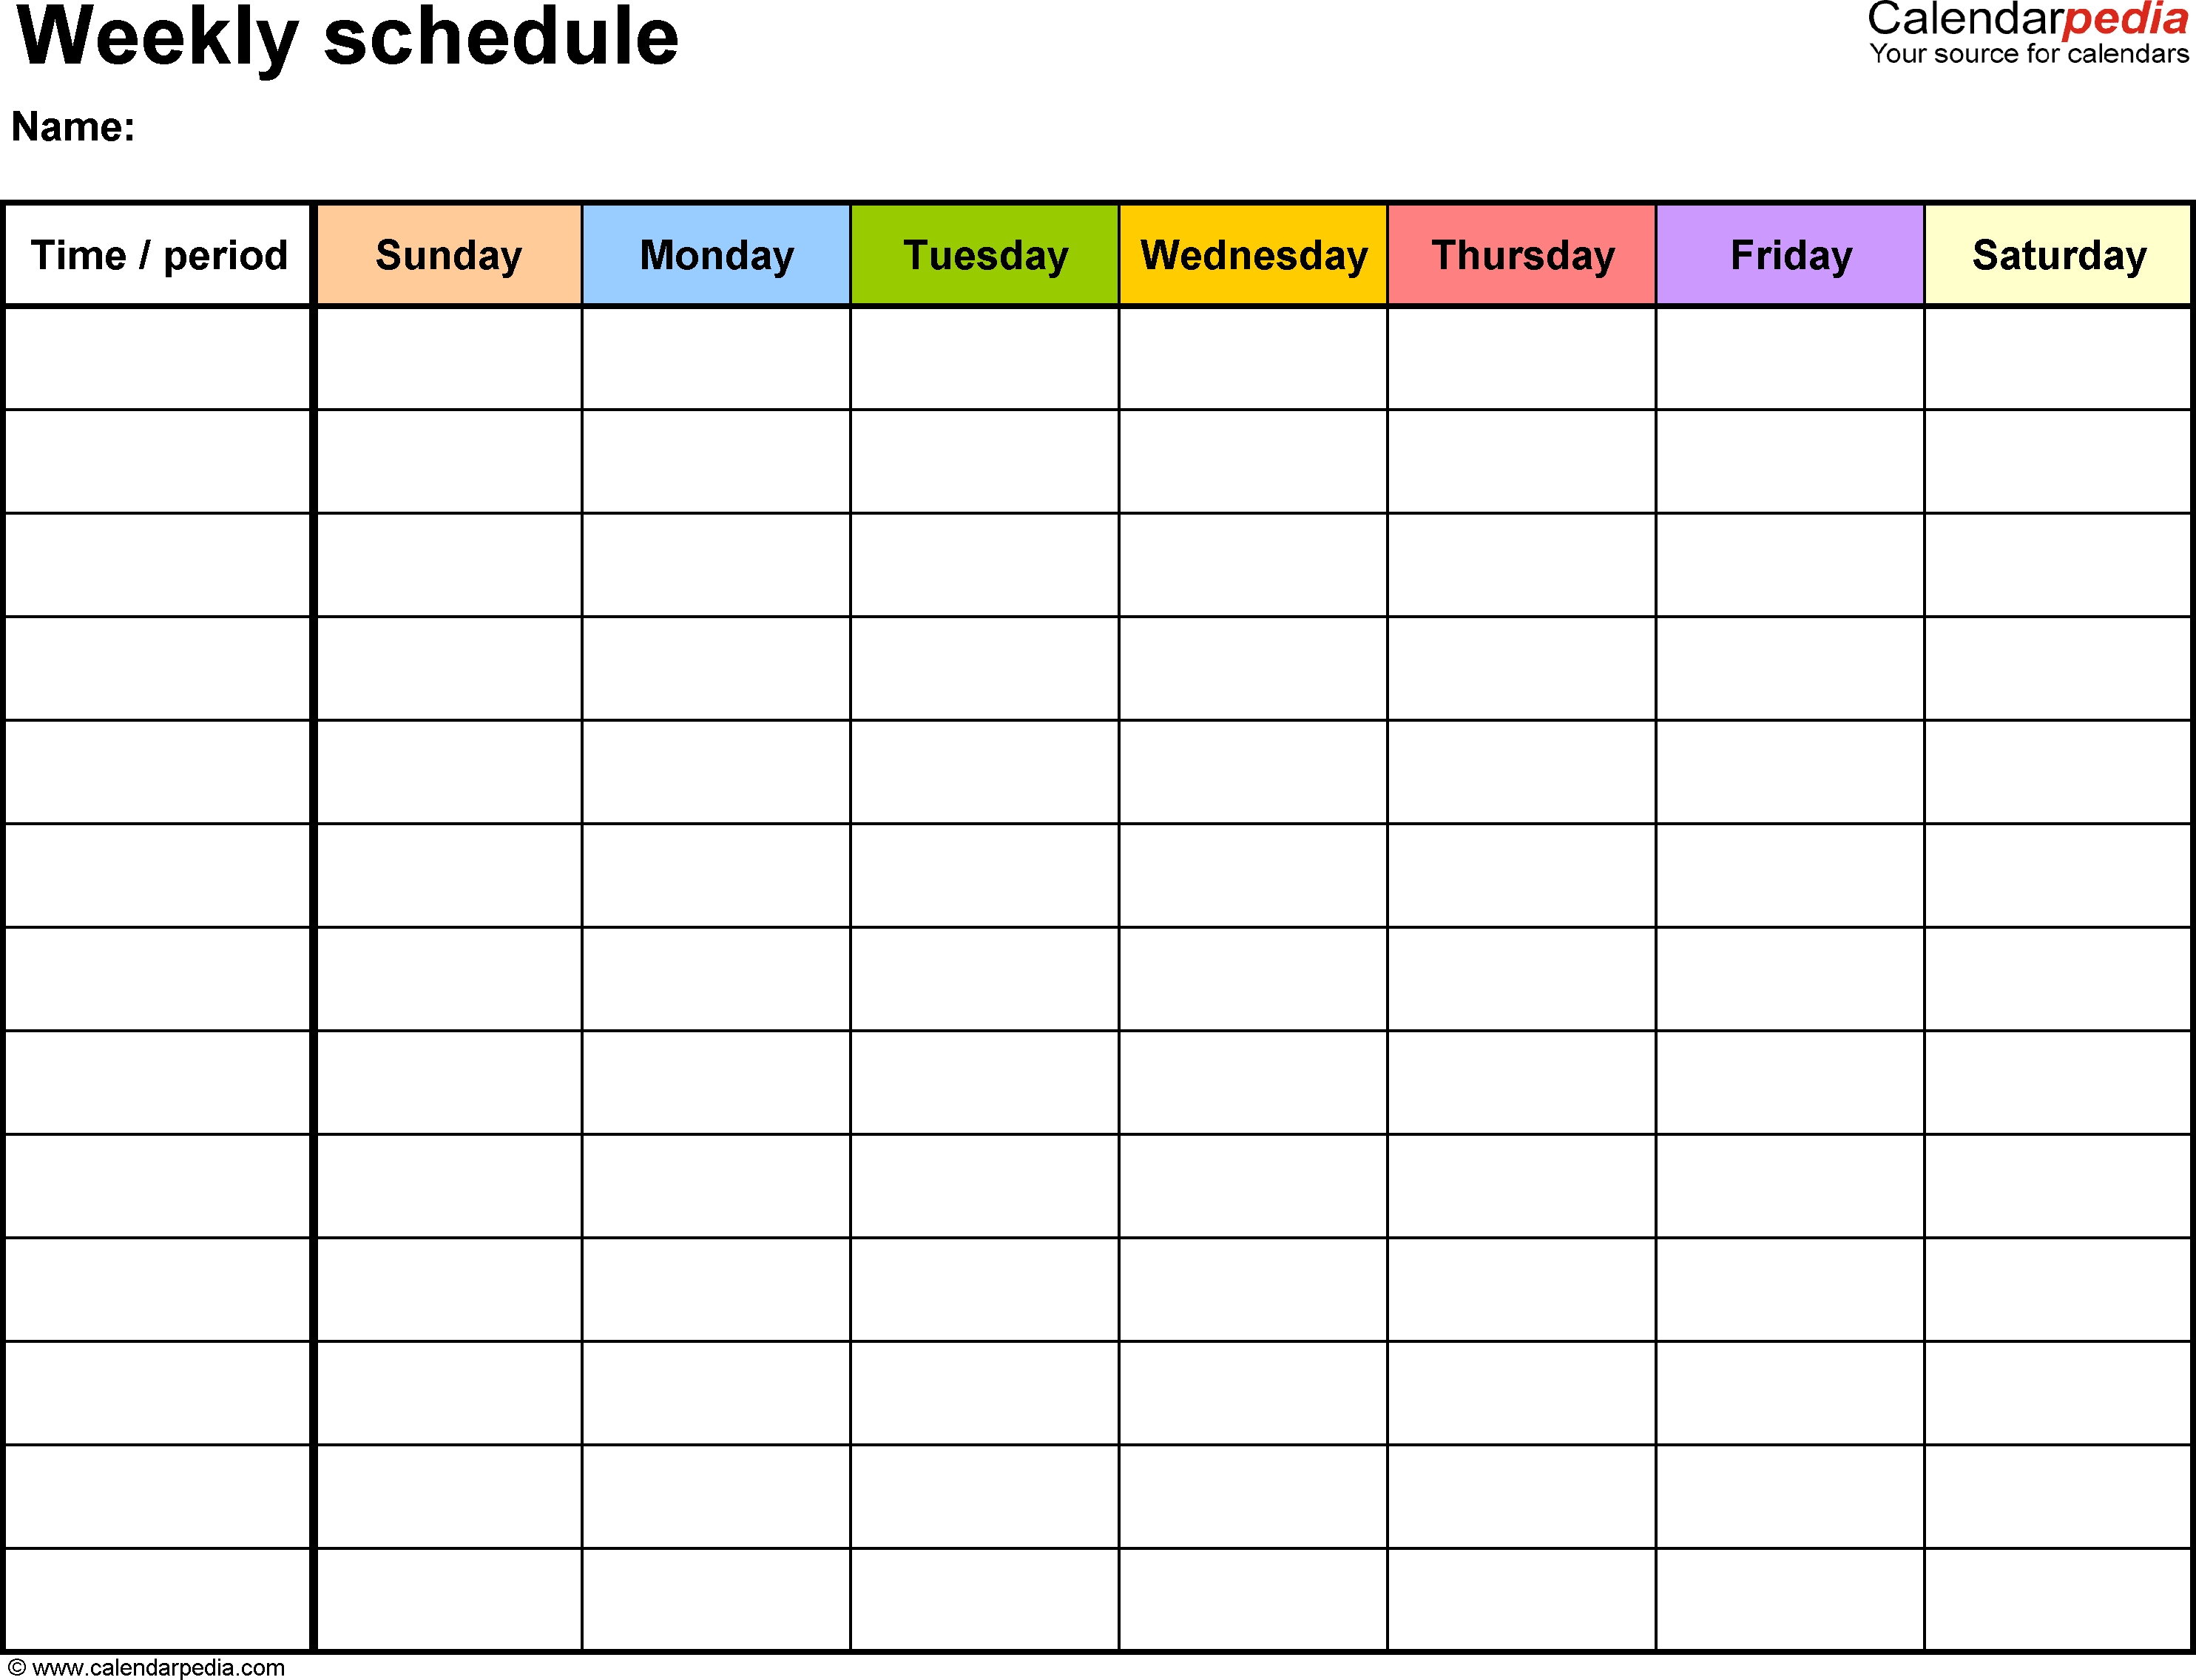 Free Weekly Schedule Templates For Excel - 18 Templates inside Free Day To Day Calendar